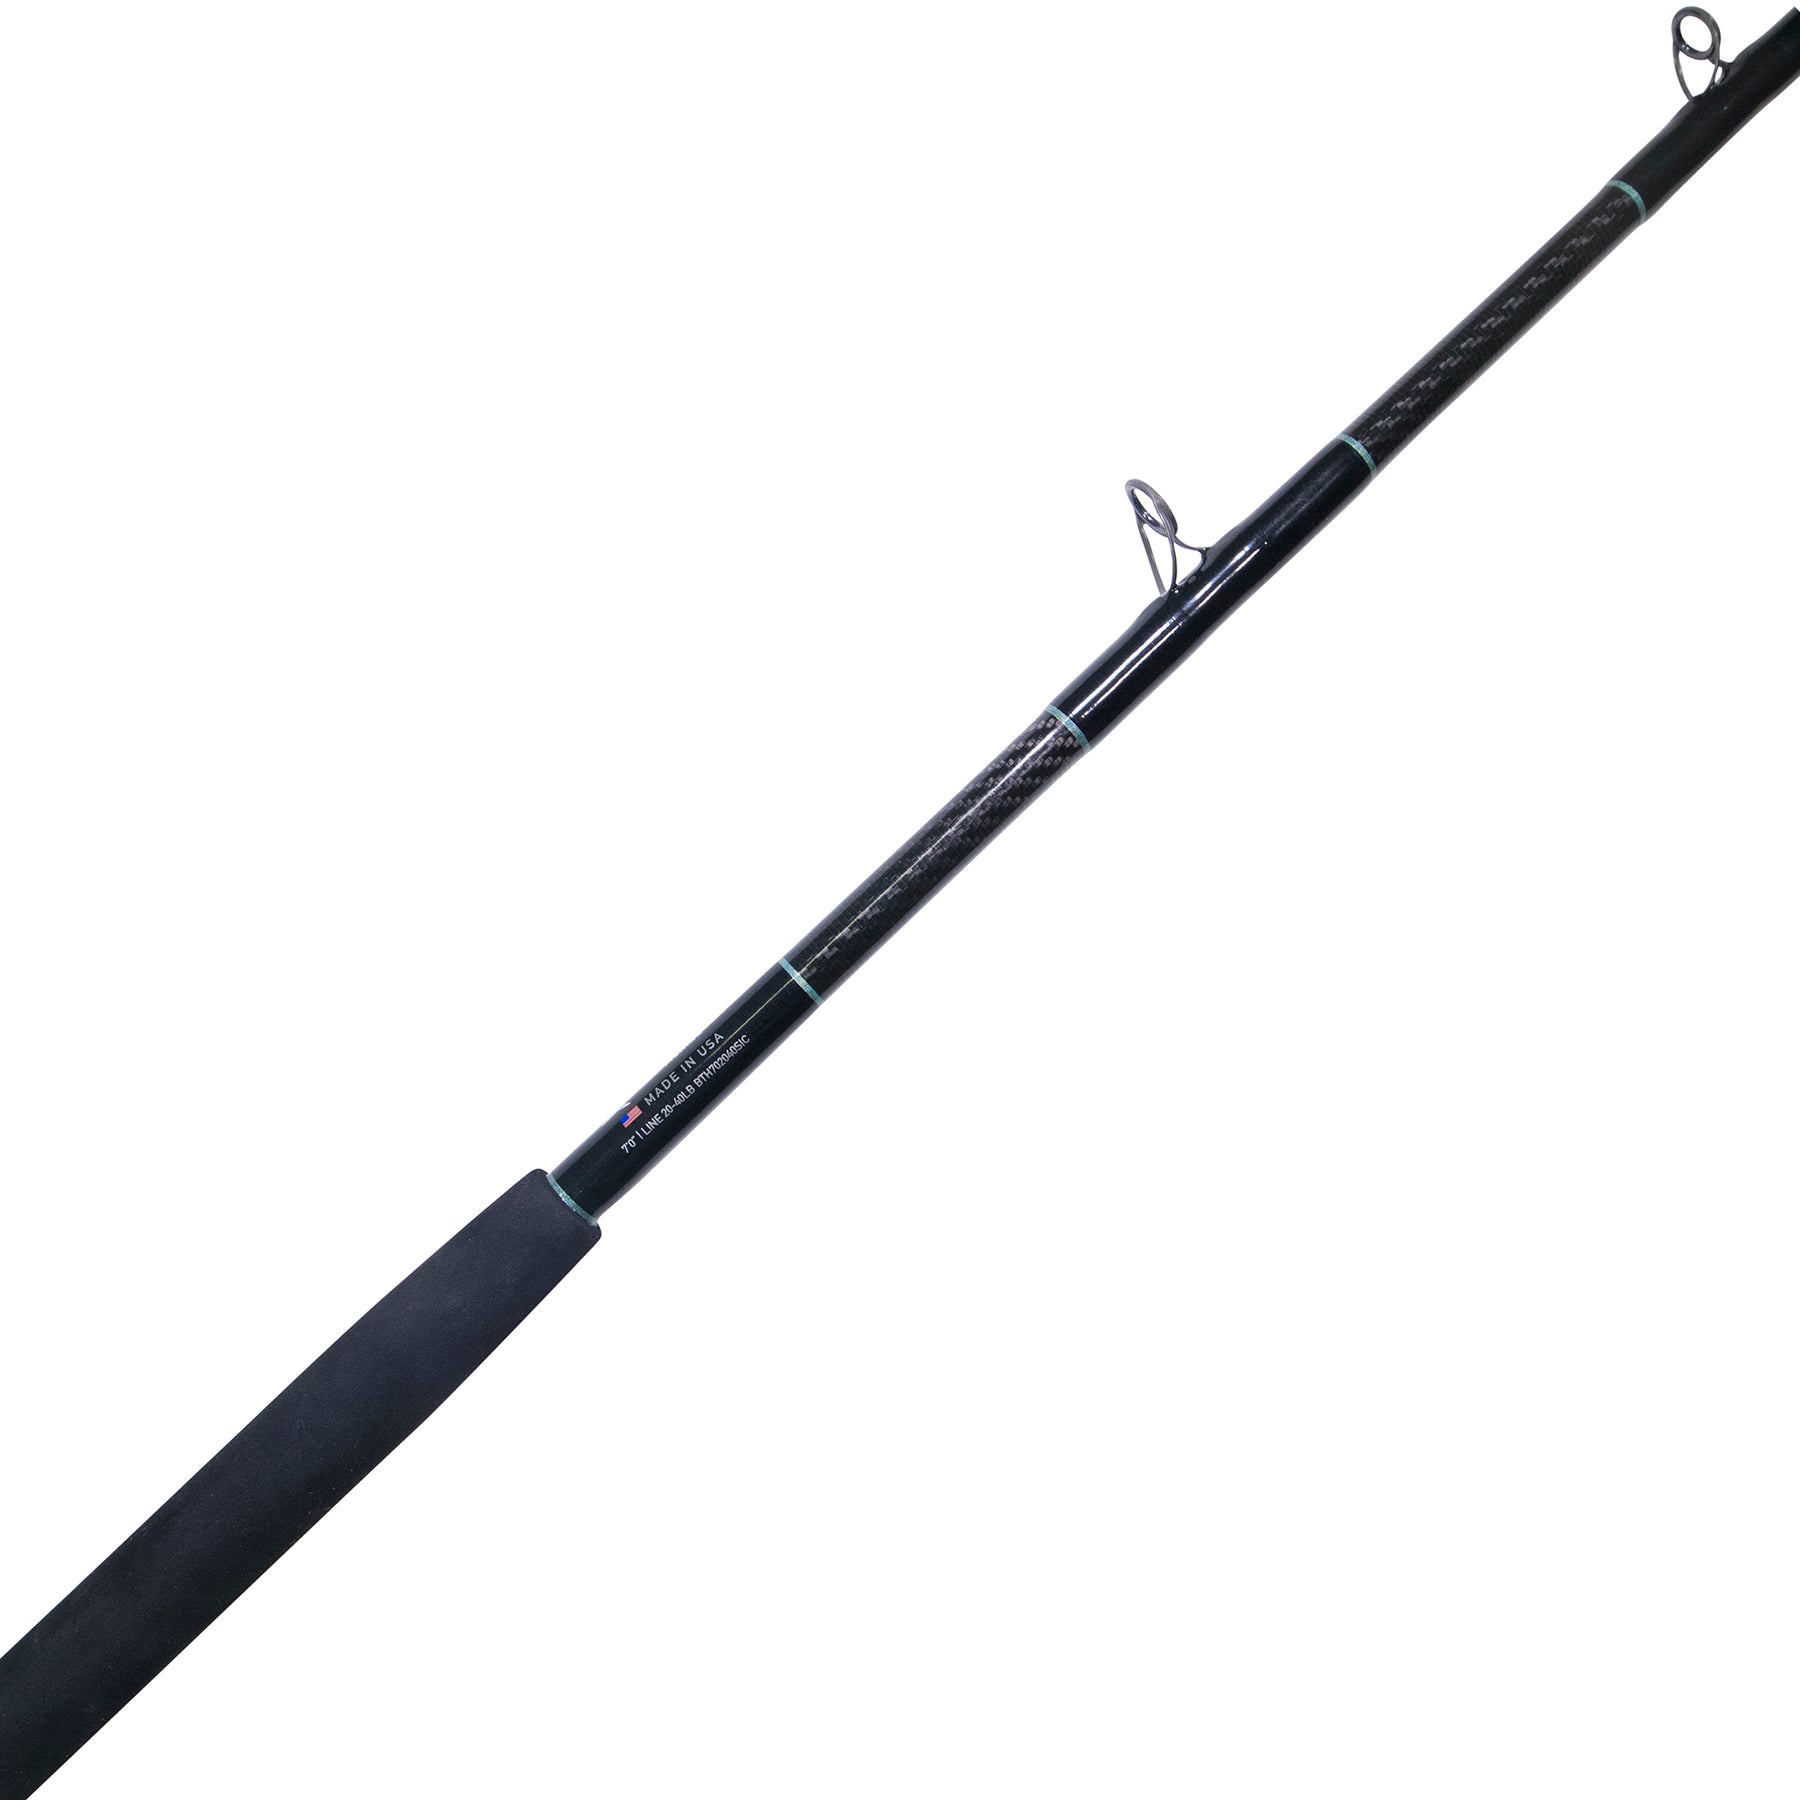 BlacktipH Shark Fishing Rod with Winthrop Terminator Butt and Carbon Fiber  Wrap